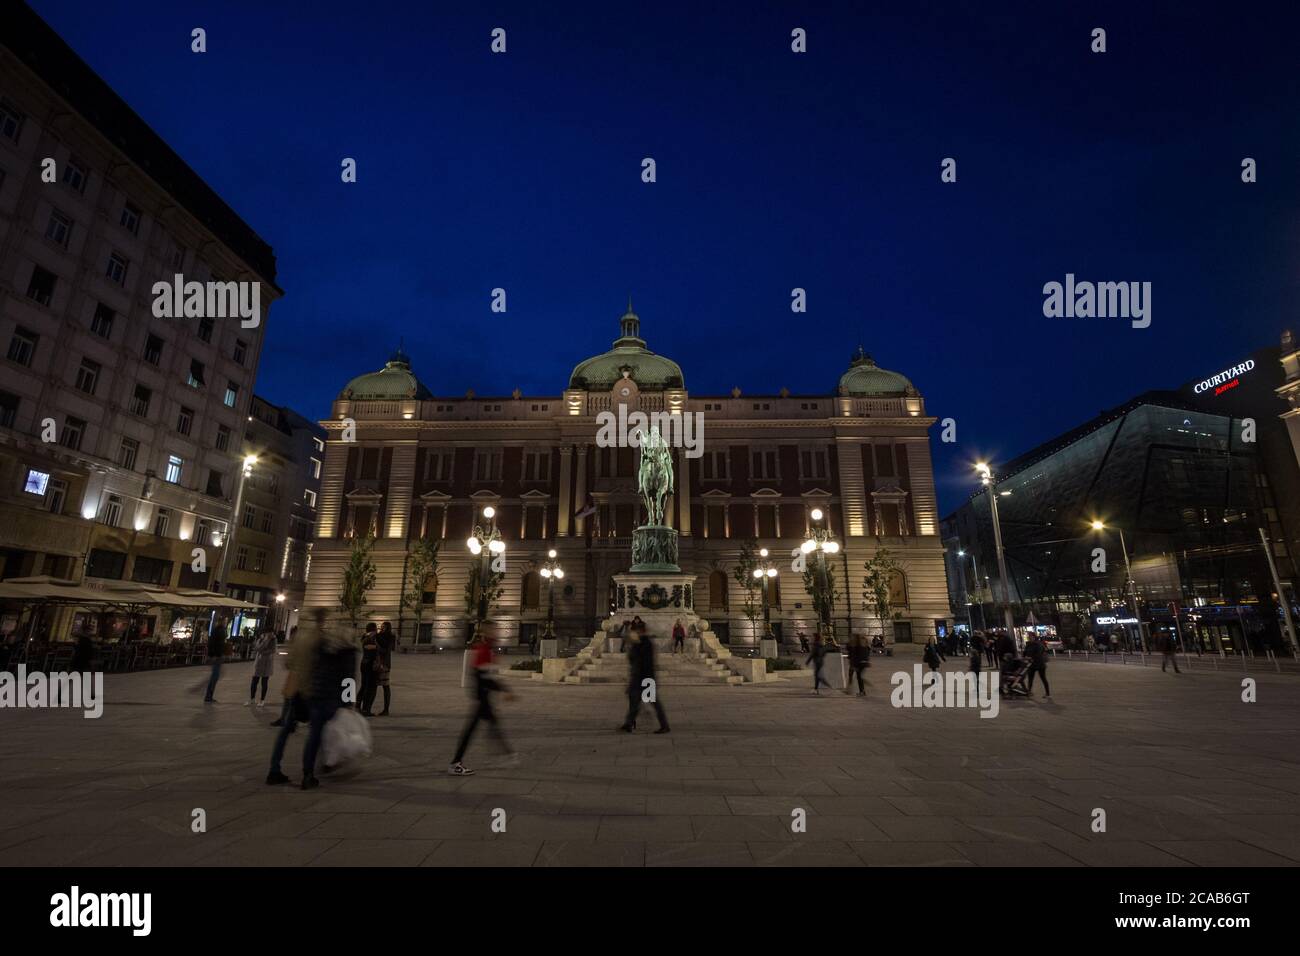 BELGRADE, SERBIA - NOVEMBER 11, 2019: Panorama of Trg Republike at night with Prince Mihailo (Knez Mihailo) statue in front of National Museum of Serb Stock Photo